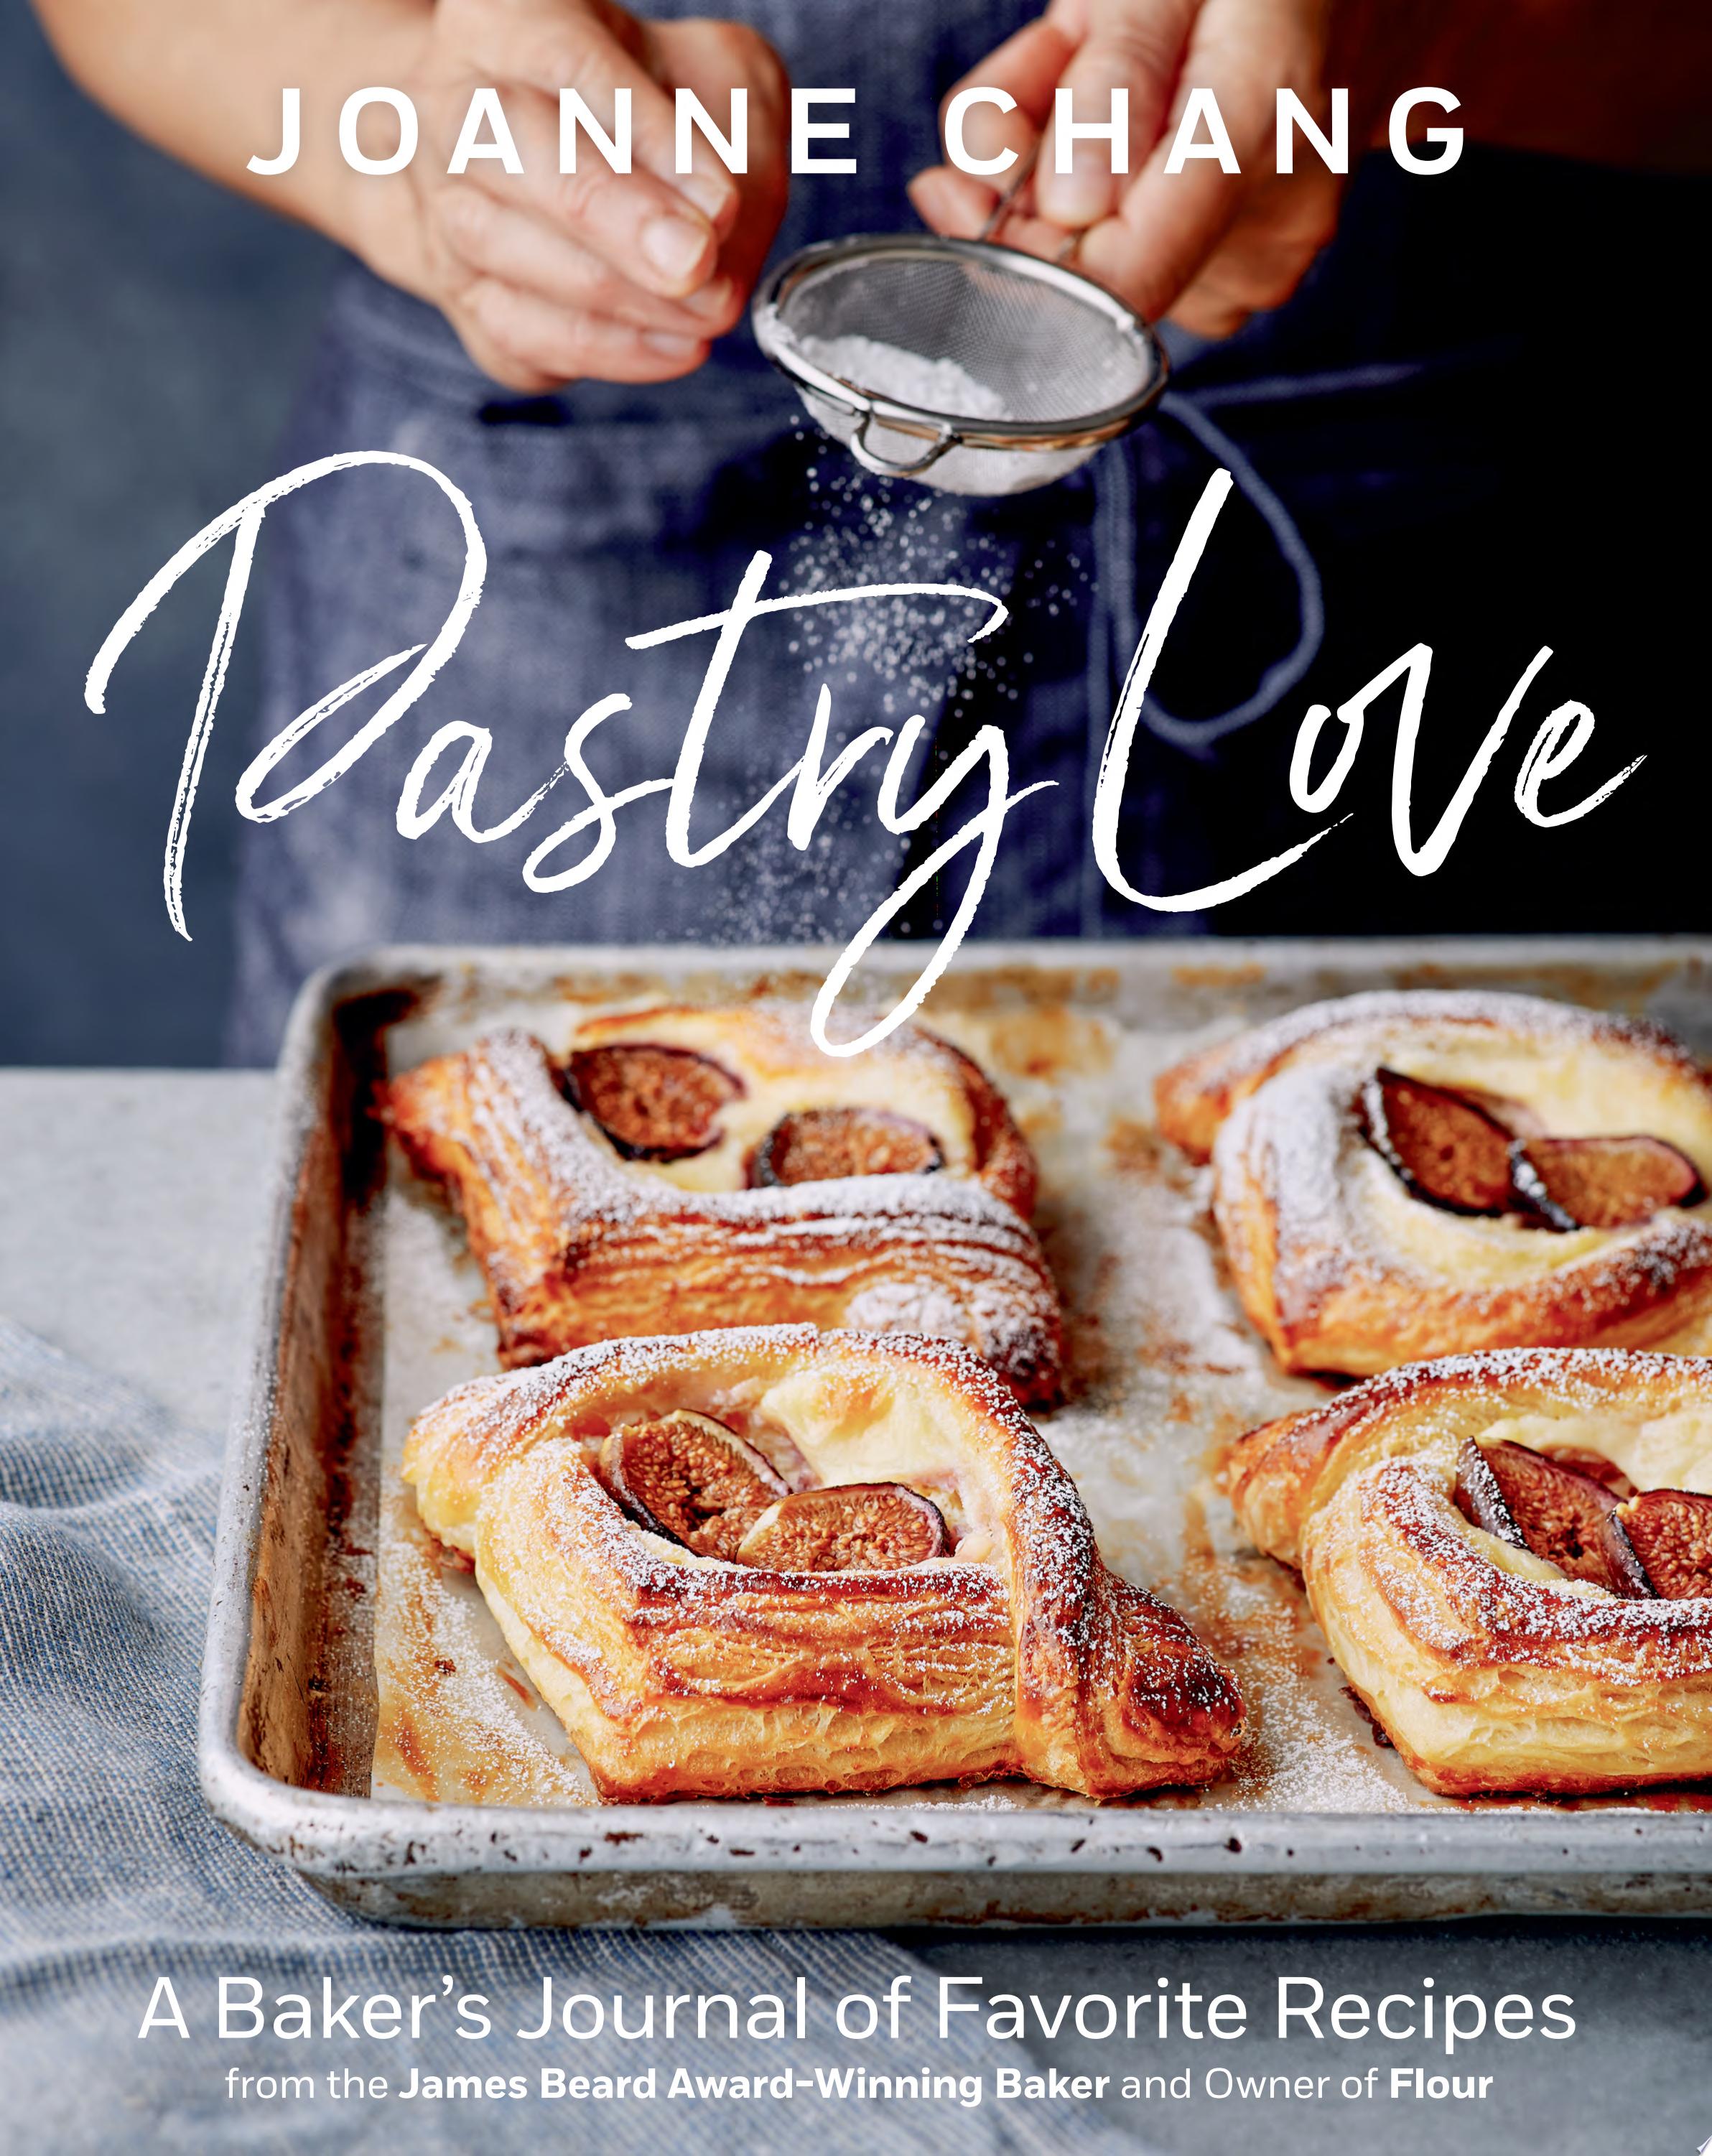 Image for "Pastry Love"